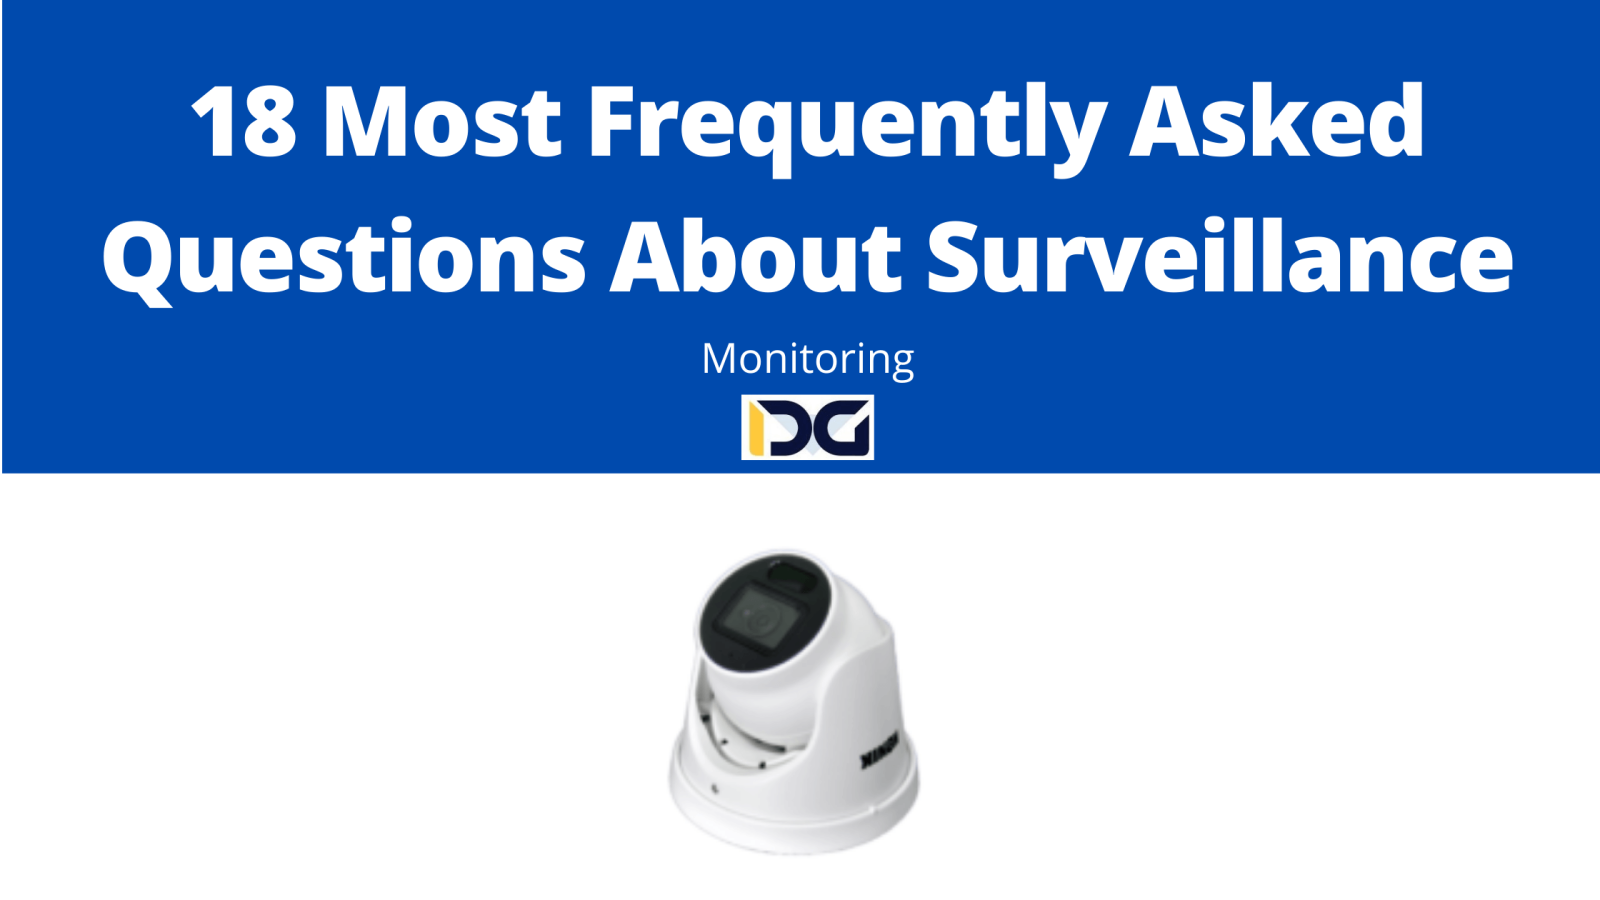 18 Most Frequently Asked Questions About Surveillance